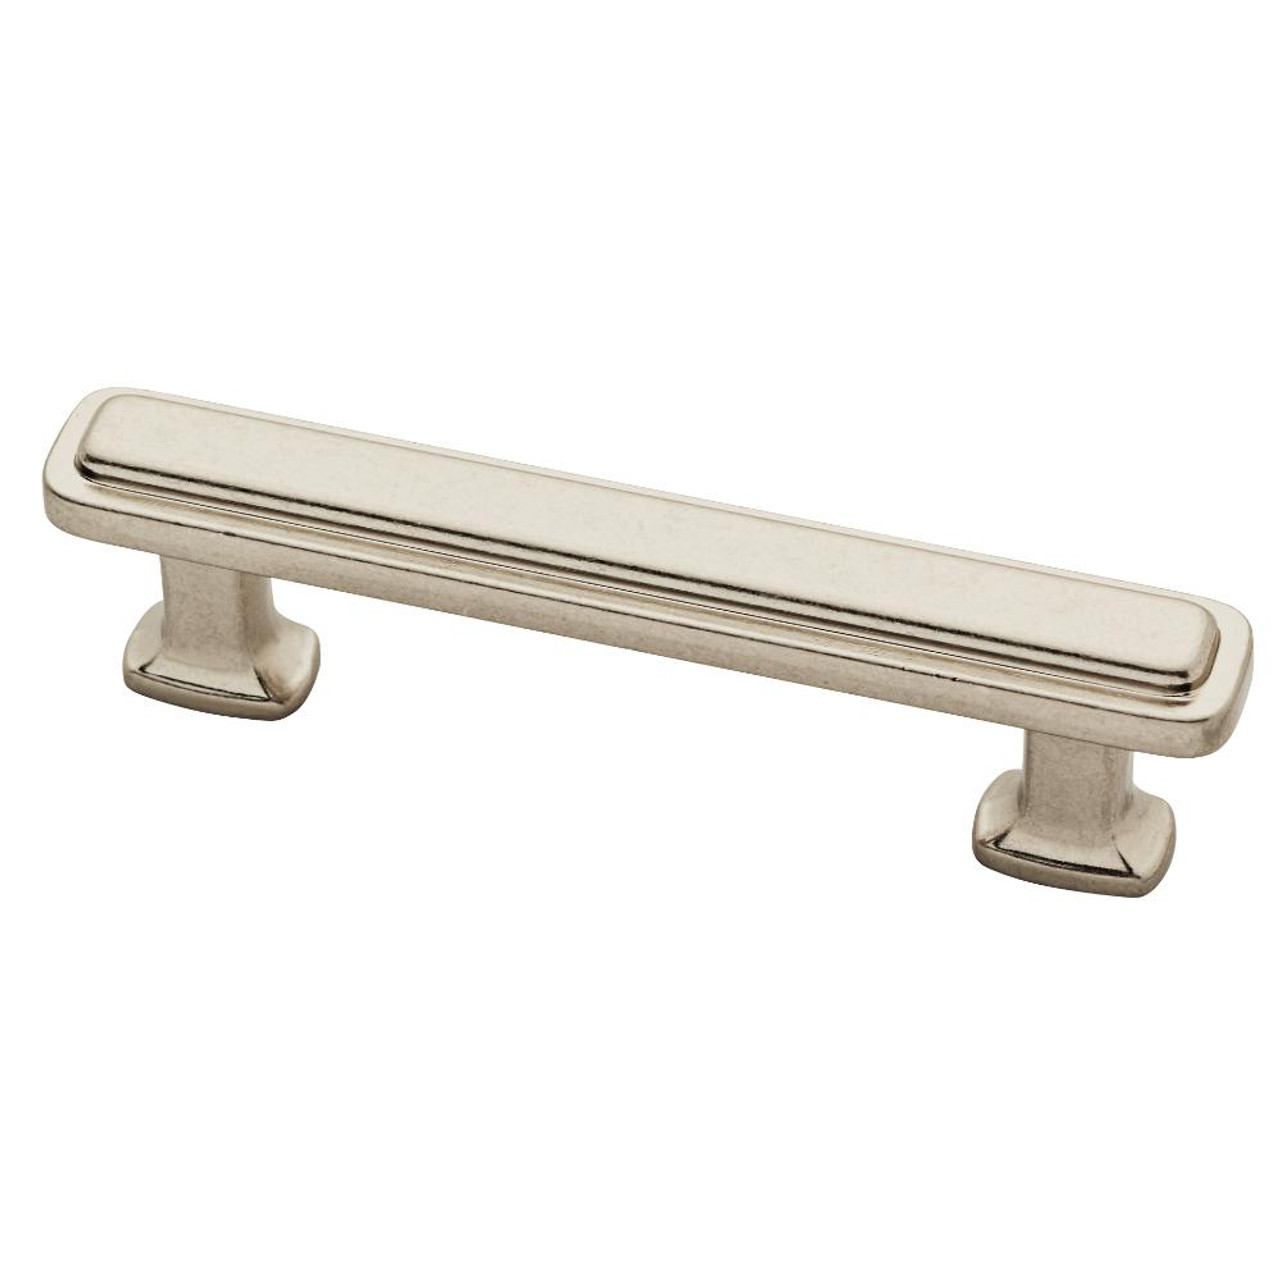 P36000C-475 Bedford Nickel 3" Refined Comfort Cabinet Drawer Pull